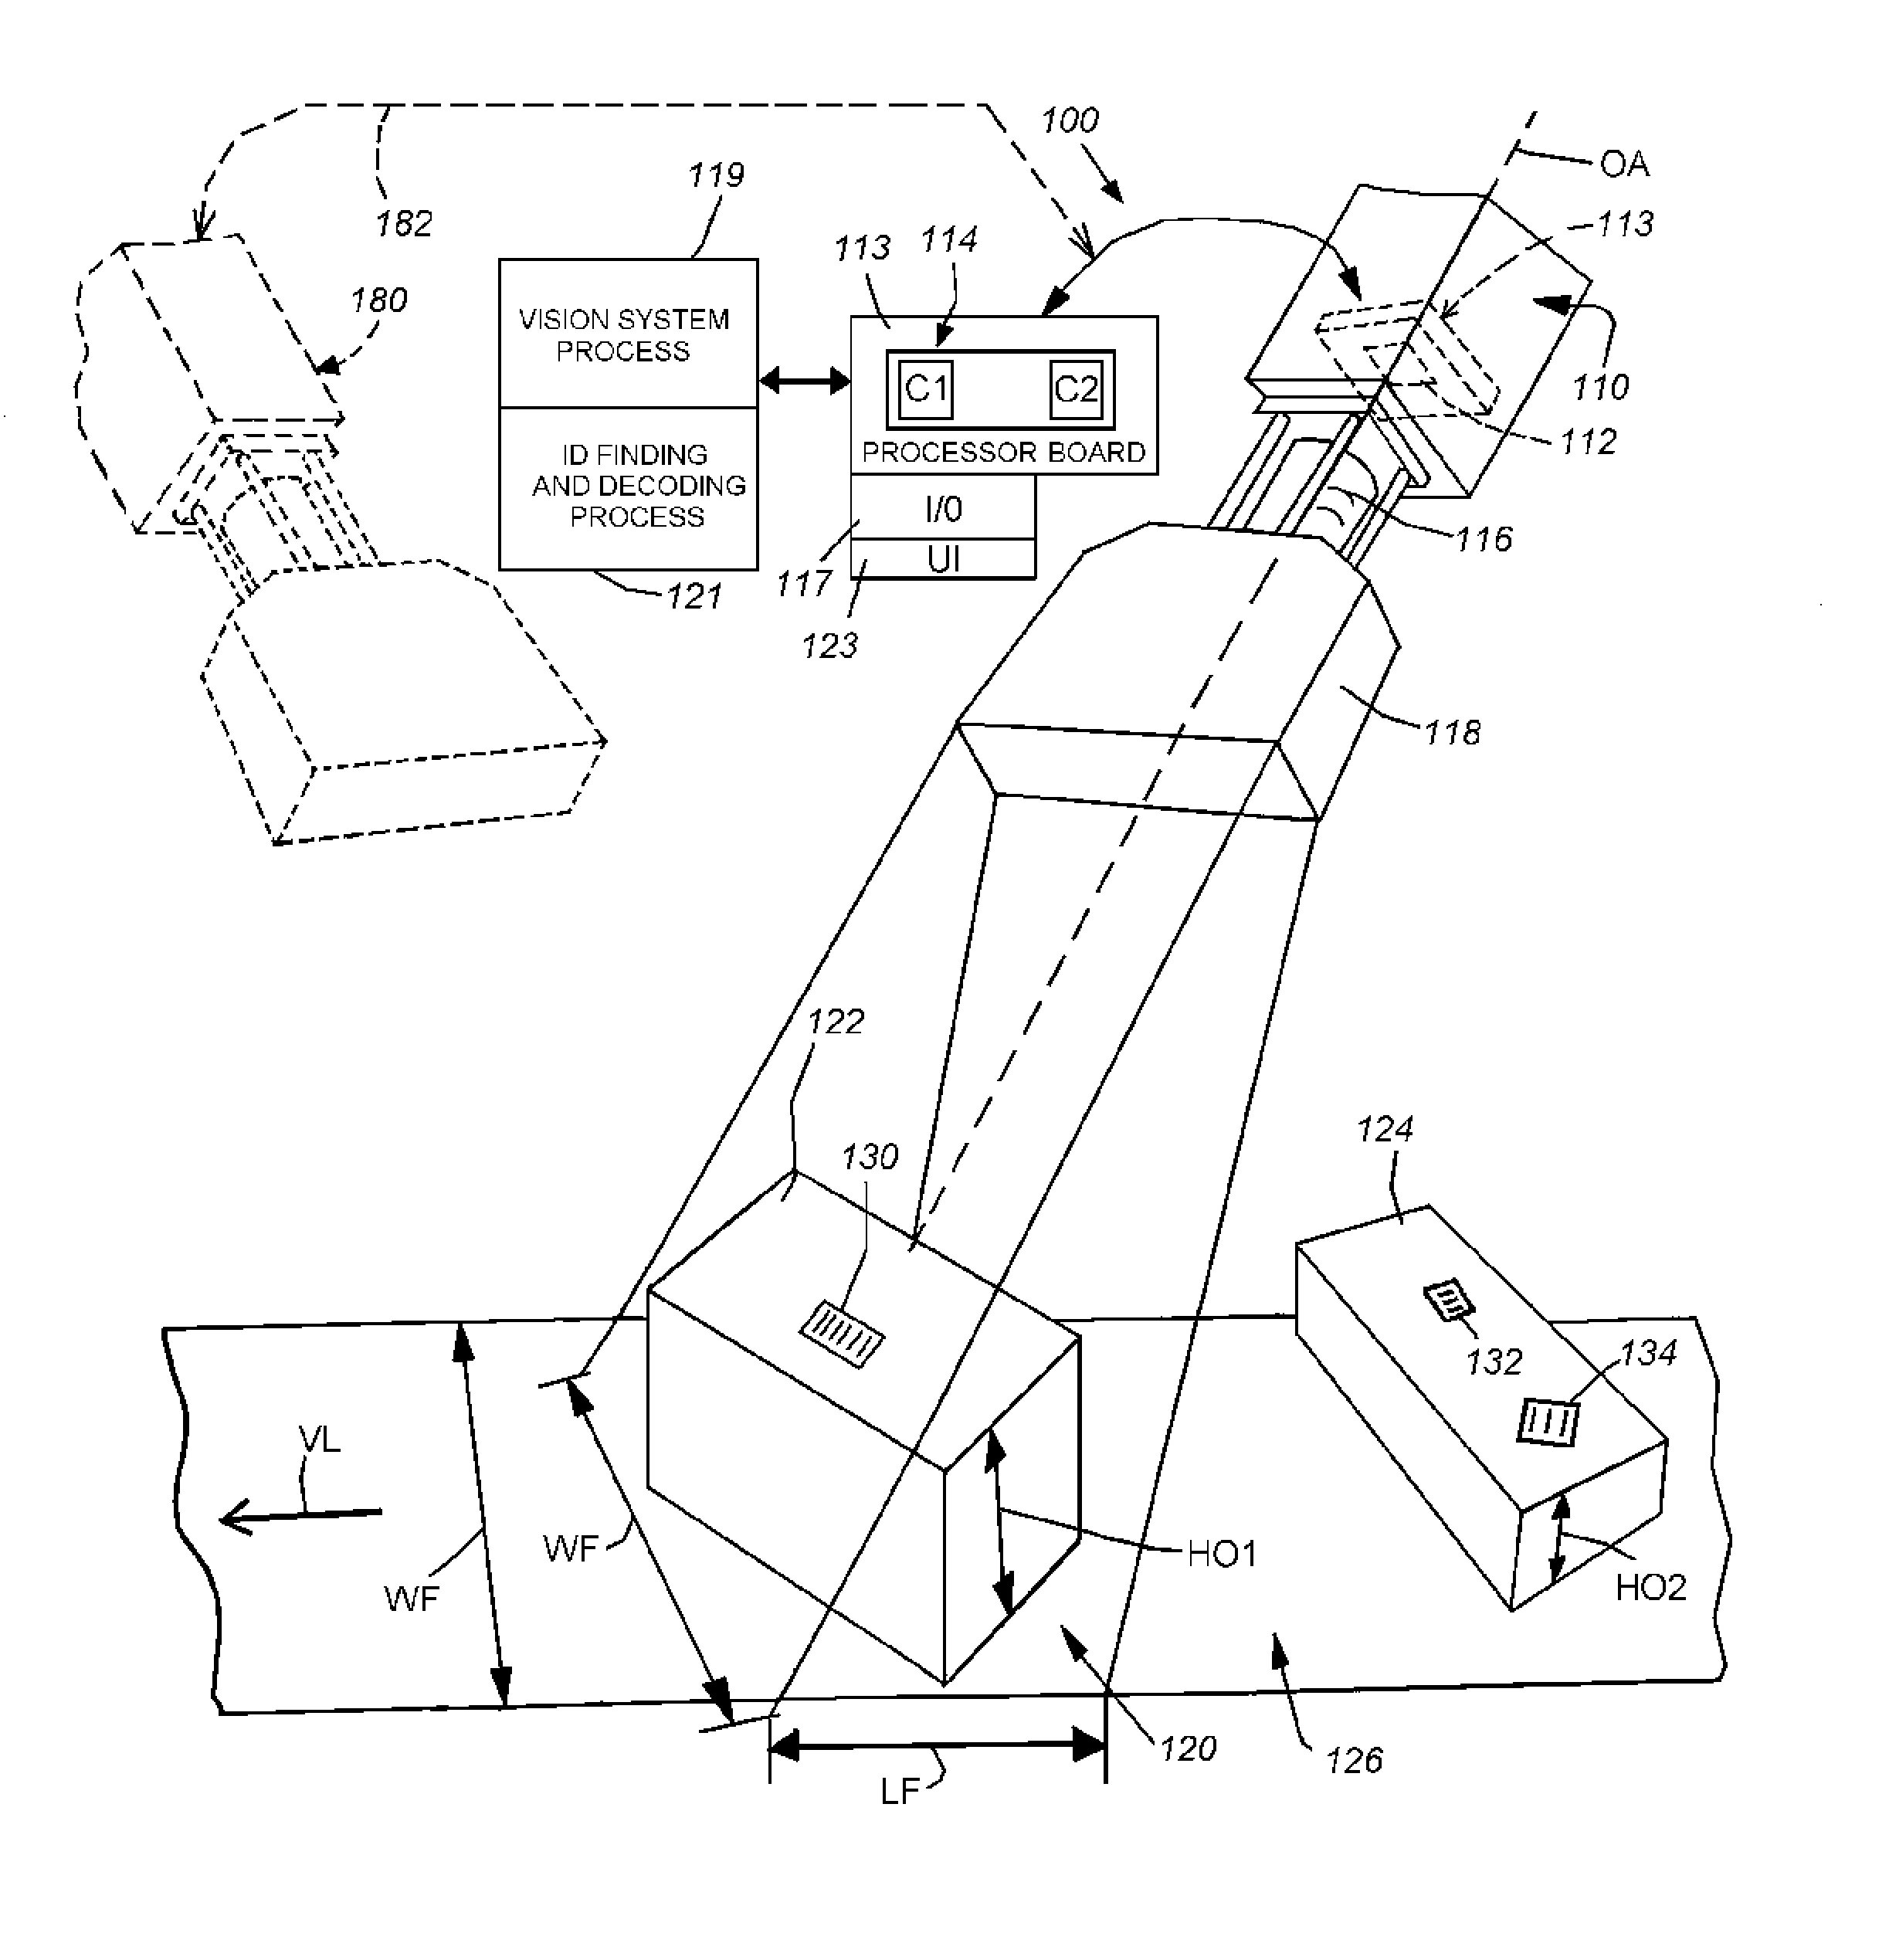 Systems and methods for operating symbology reader with multi-core processor